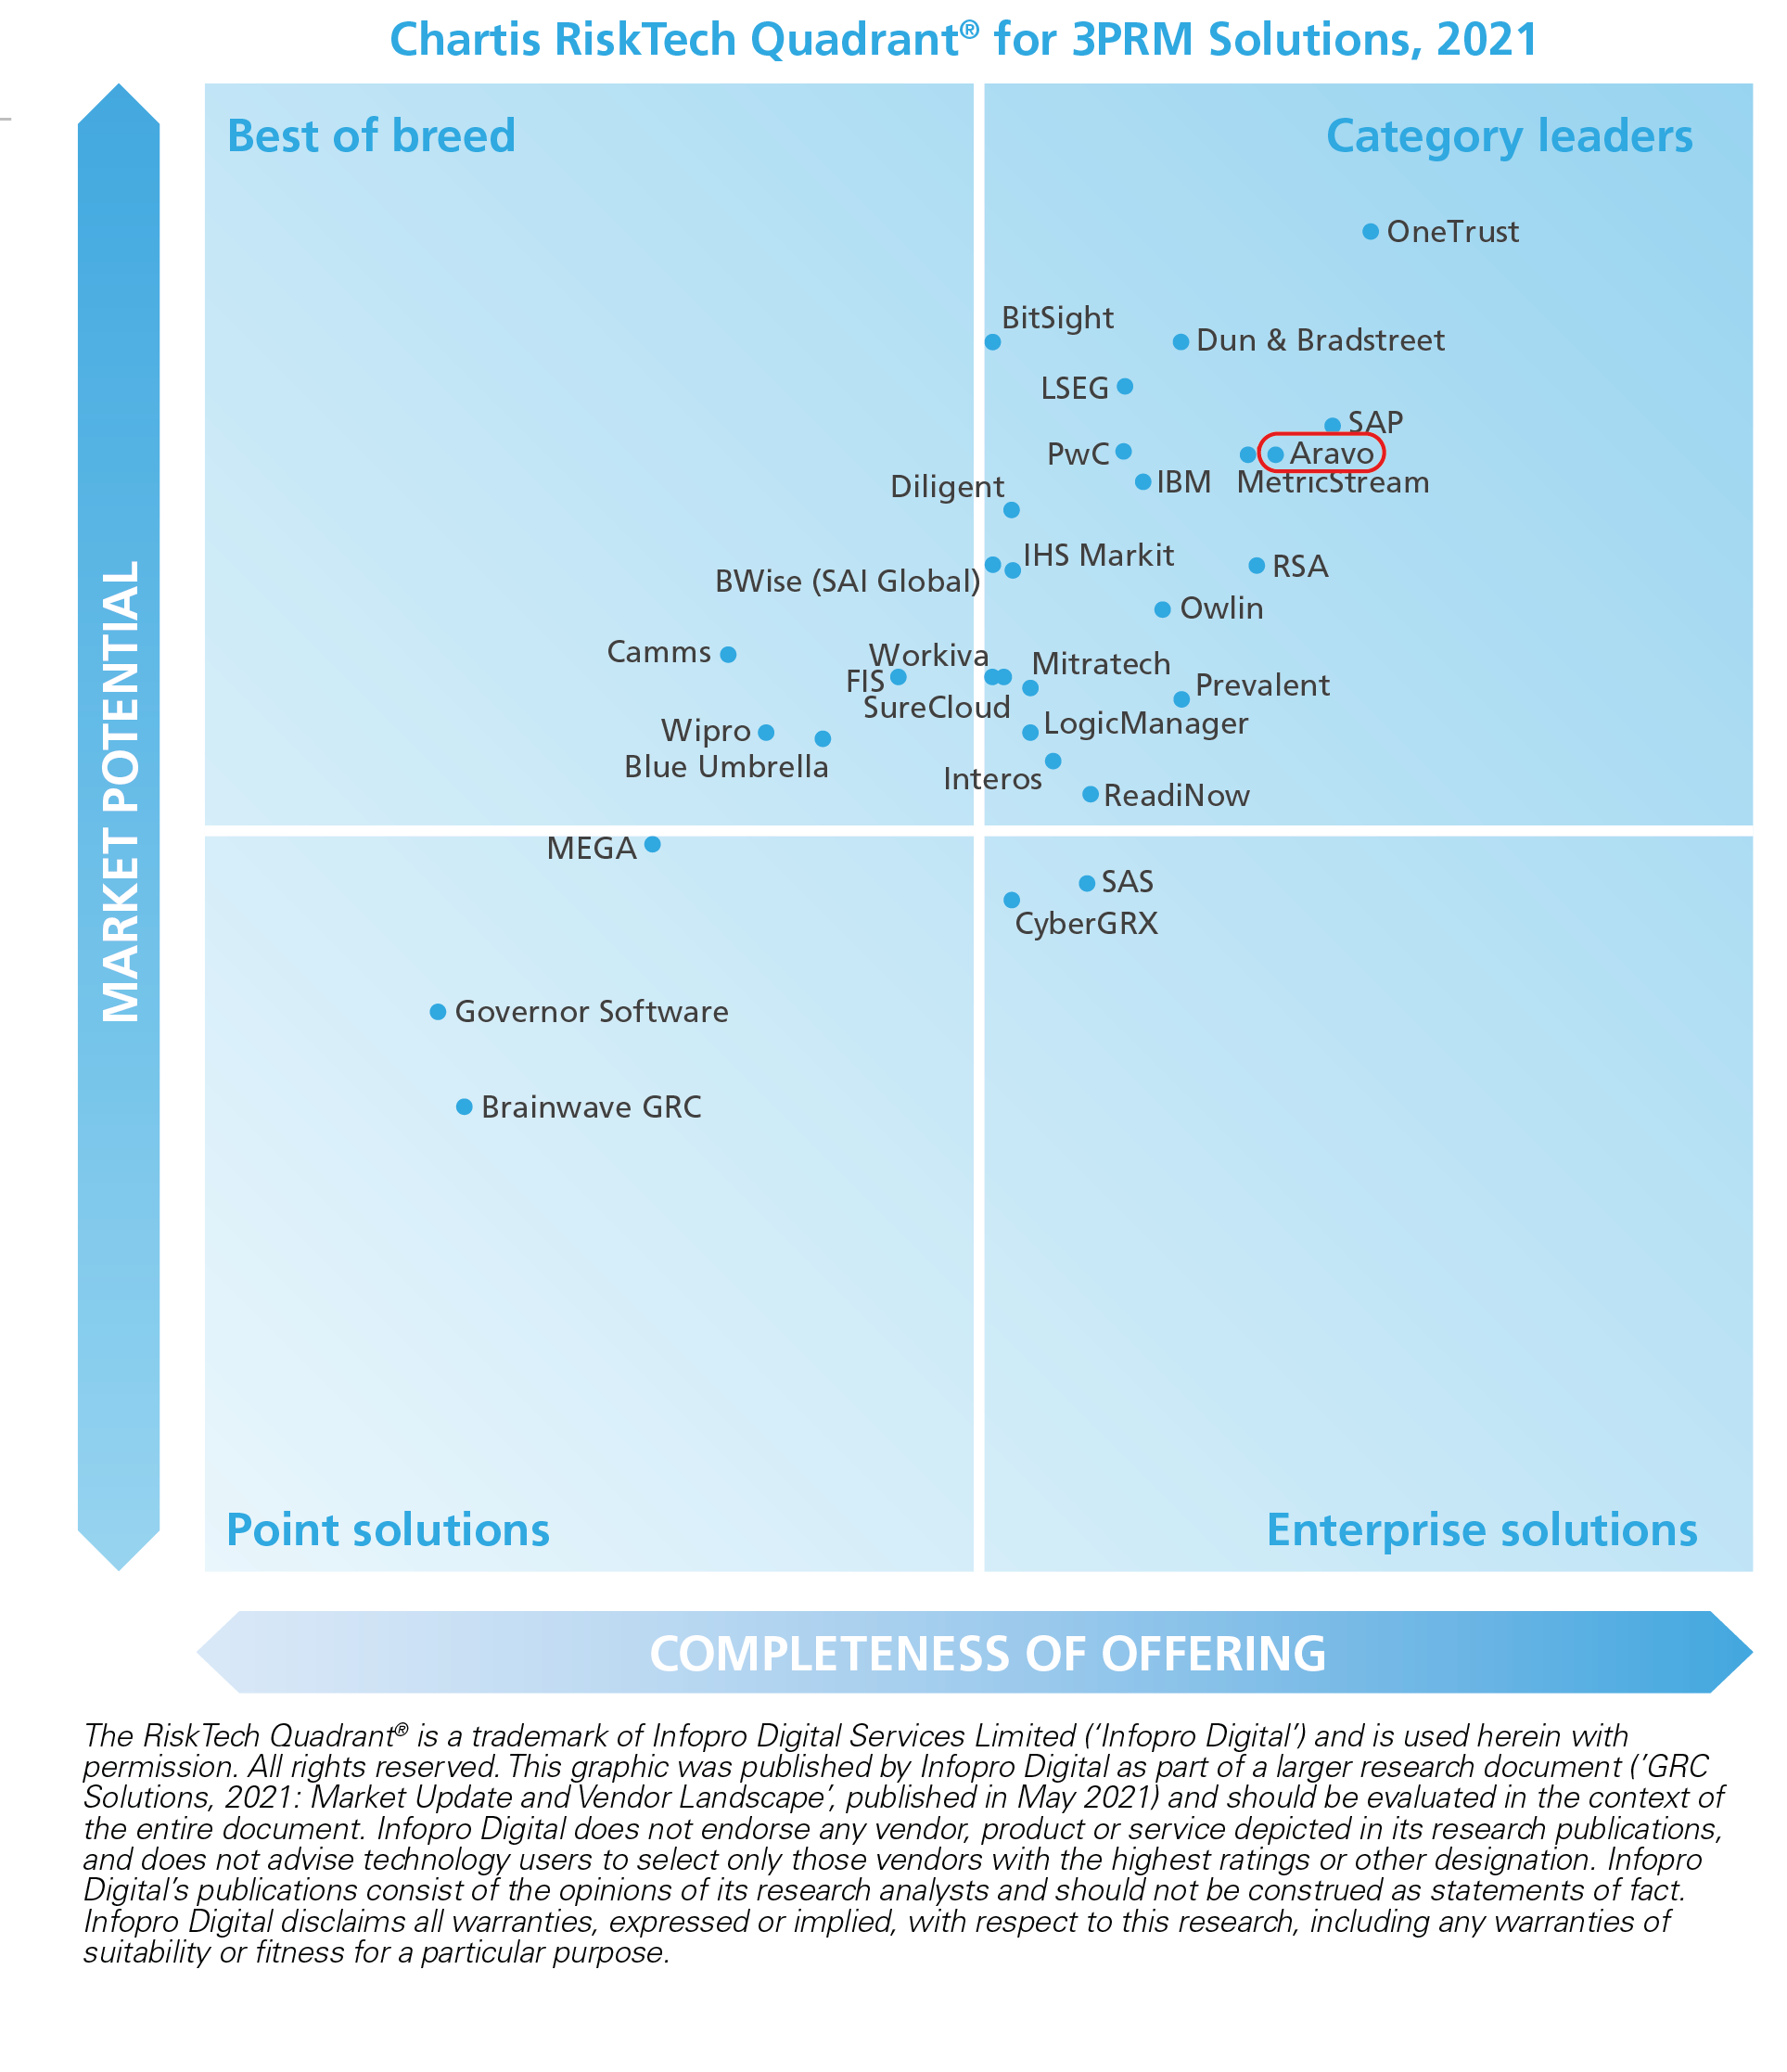 Aravo Positioned as Category Leader in 2021 Chartis RiskTech Quadrant for 3PRM Solutions